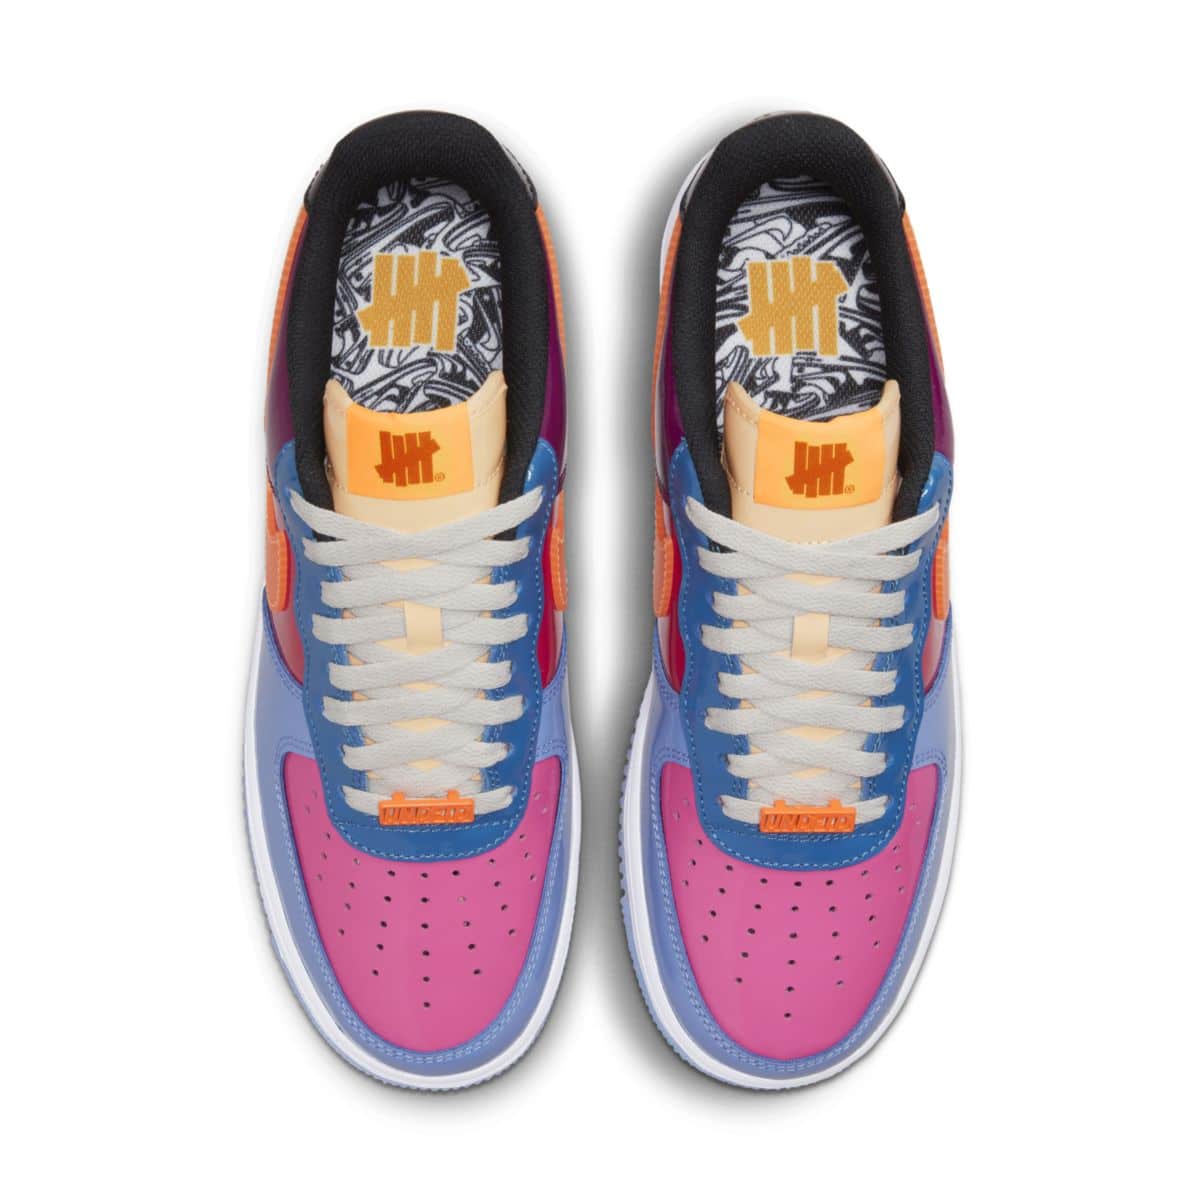 Undefeated x Nike Air Force 1 Low SP Total Orange DV5255-400 5